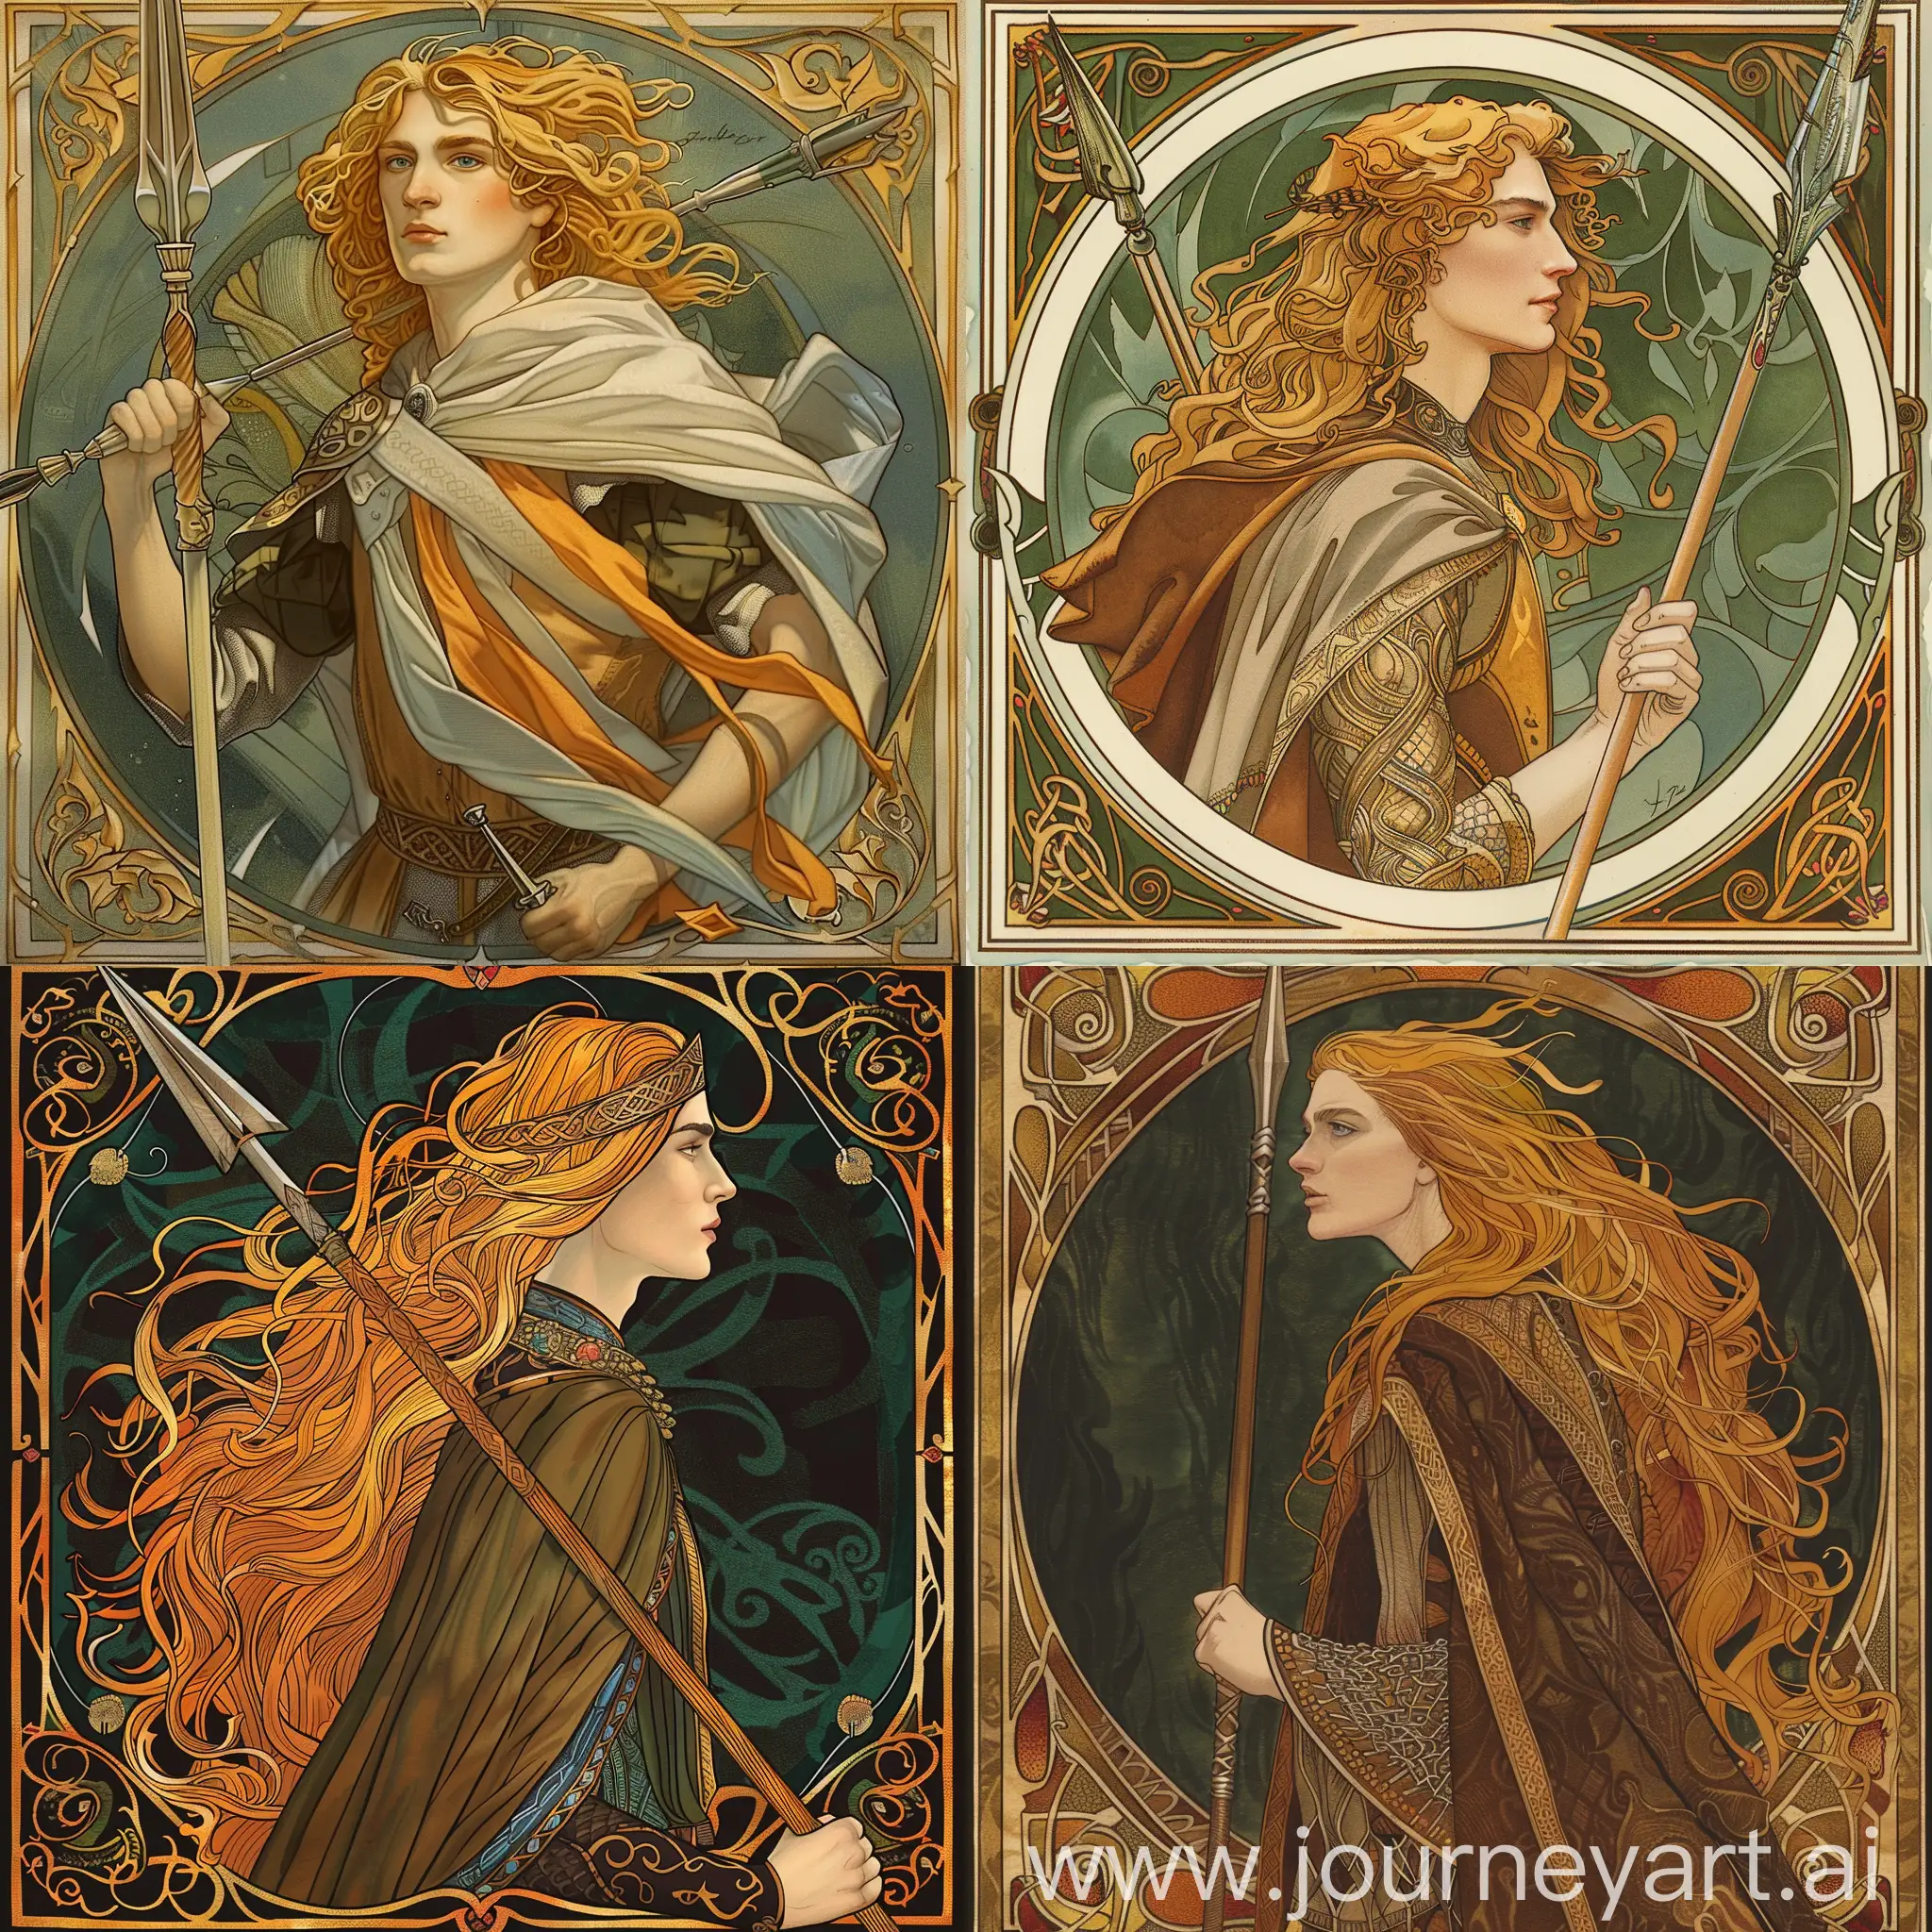 GoldenHaired-Warrior-in-Mantle-with-Spear-Art-Nouveau-Illustration